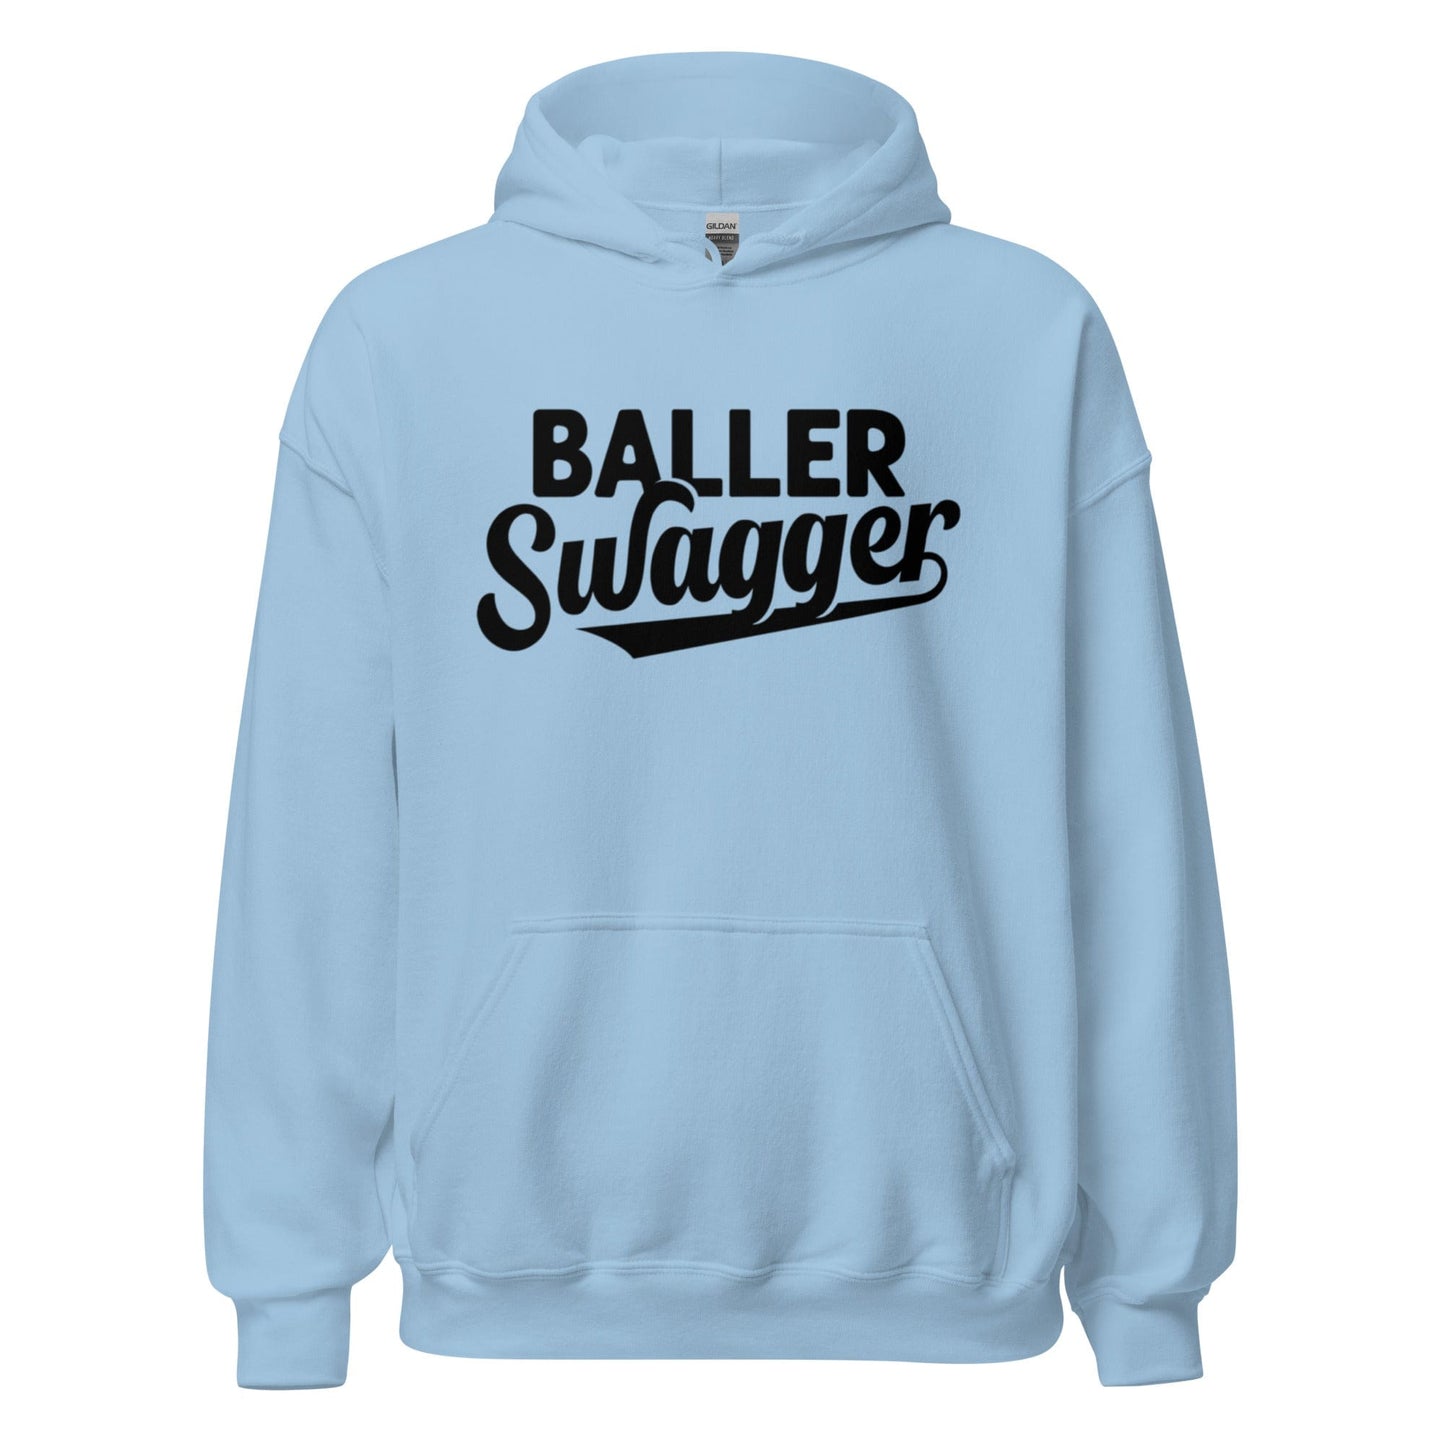 Baller Swagger - Adult Hoodie